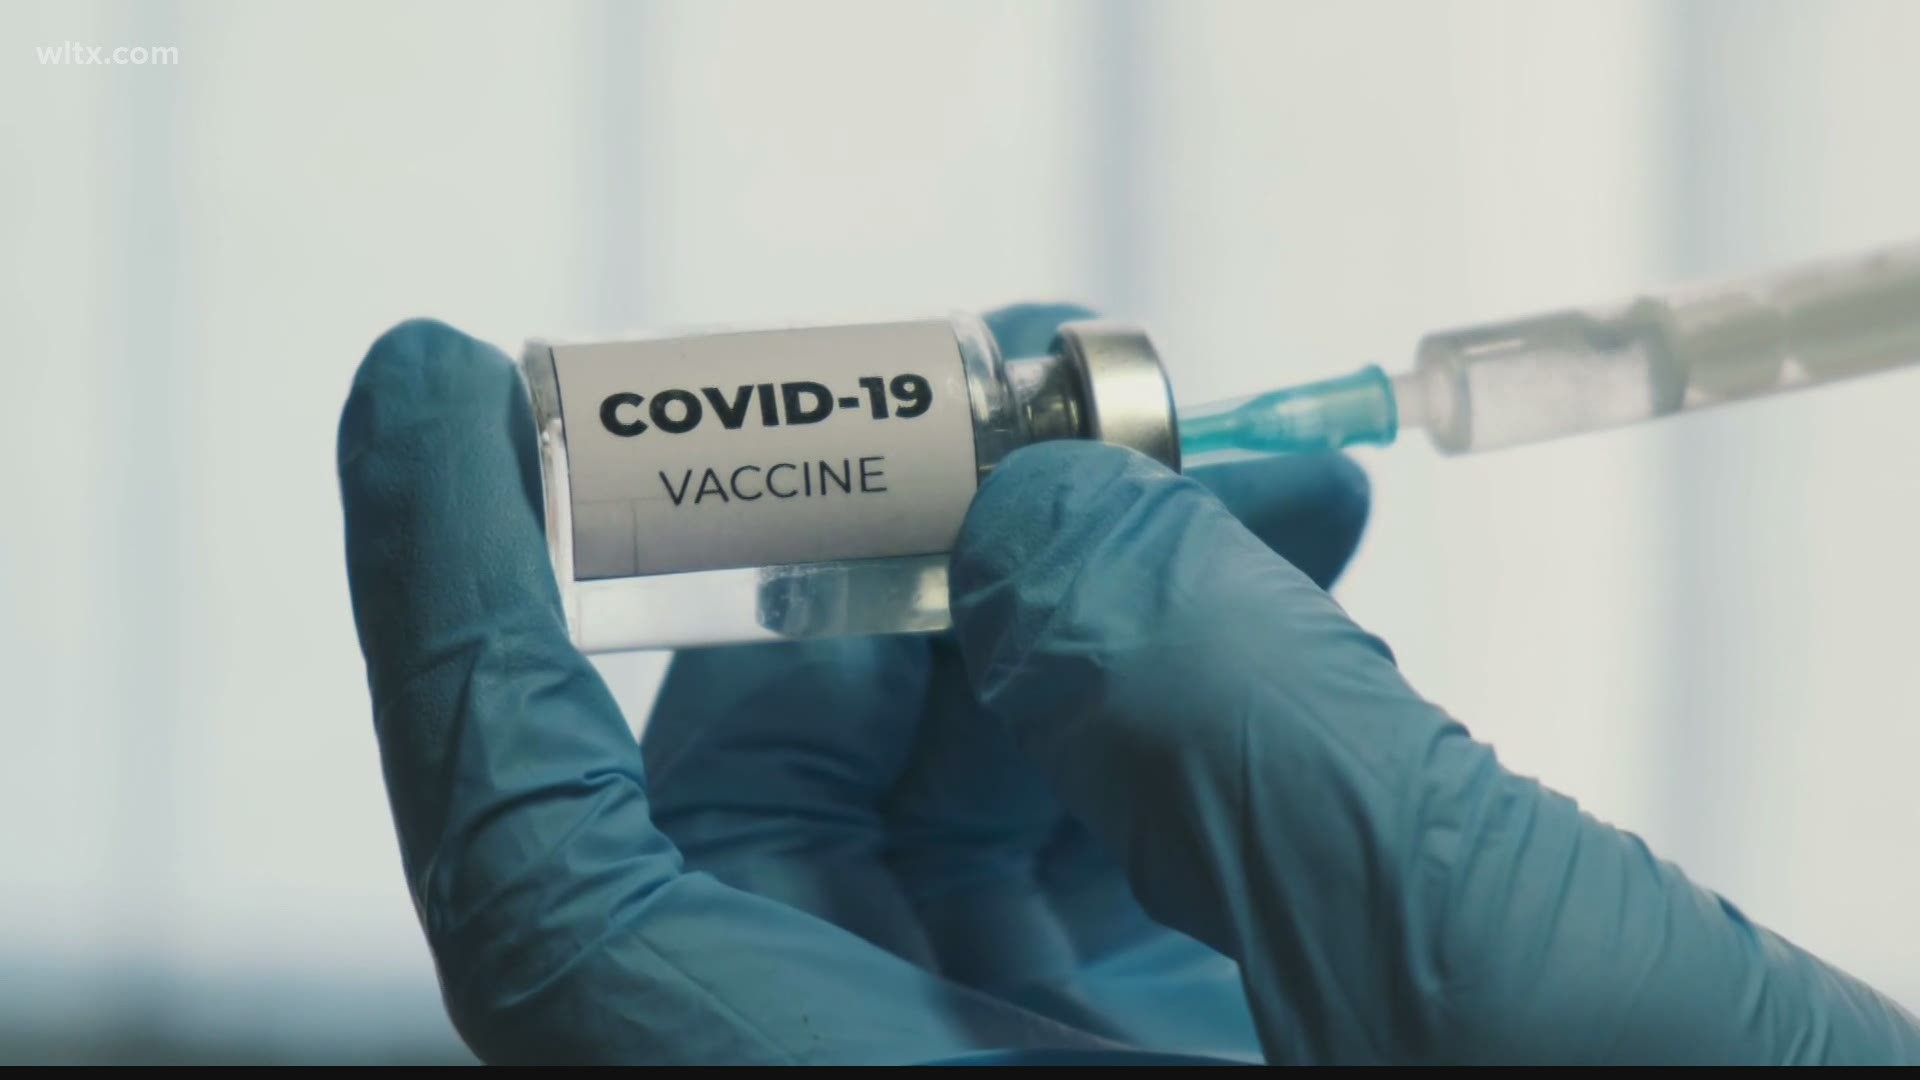 Diabetes patients say it's a welcome relief they can soon get their COVID-19 vaccine.